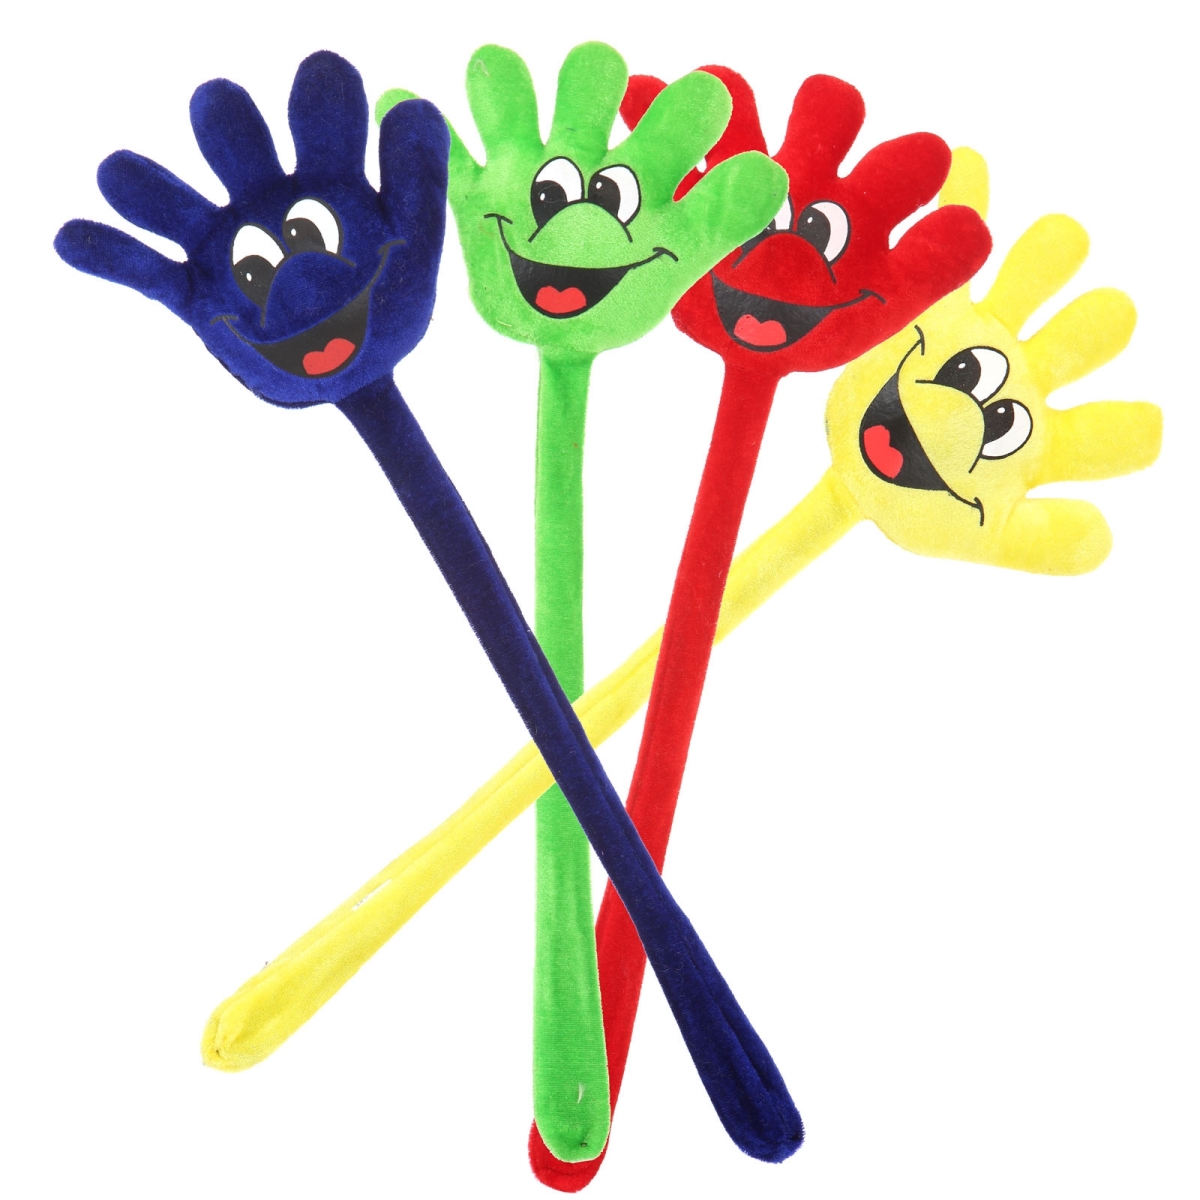 Picture of Giftable World AO070007 19 in. Fun Hand with Laughing - 6 Assorted Color